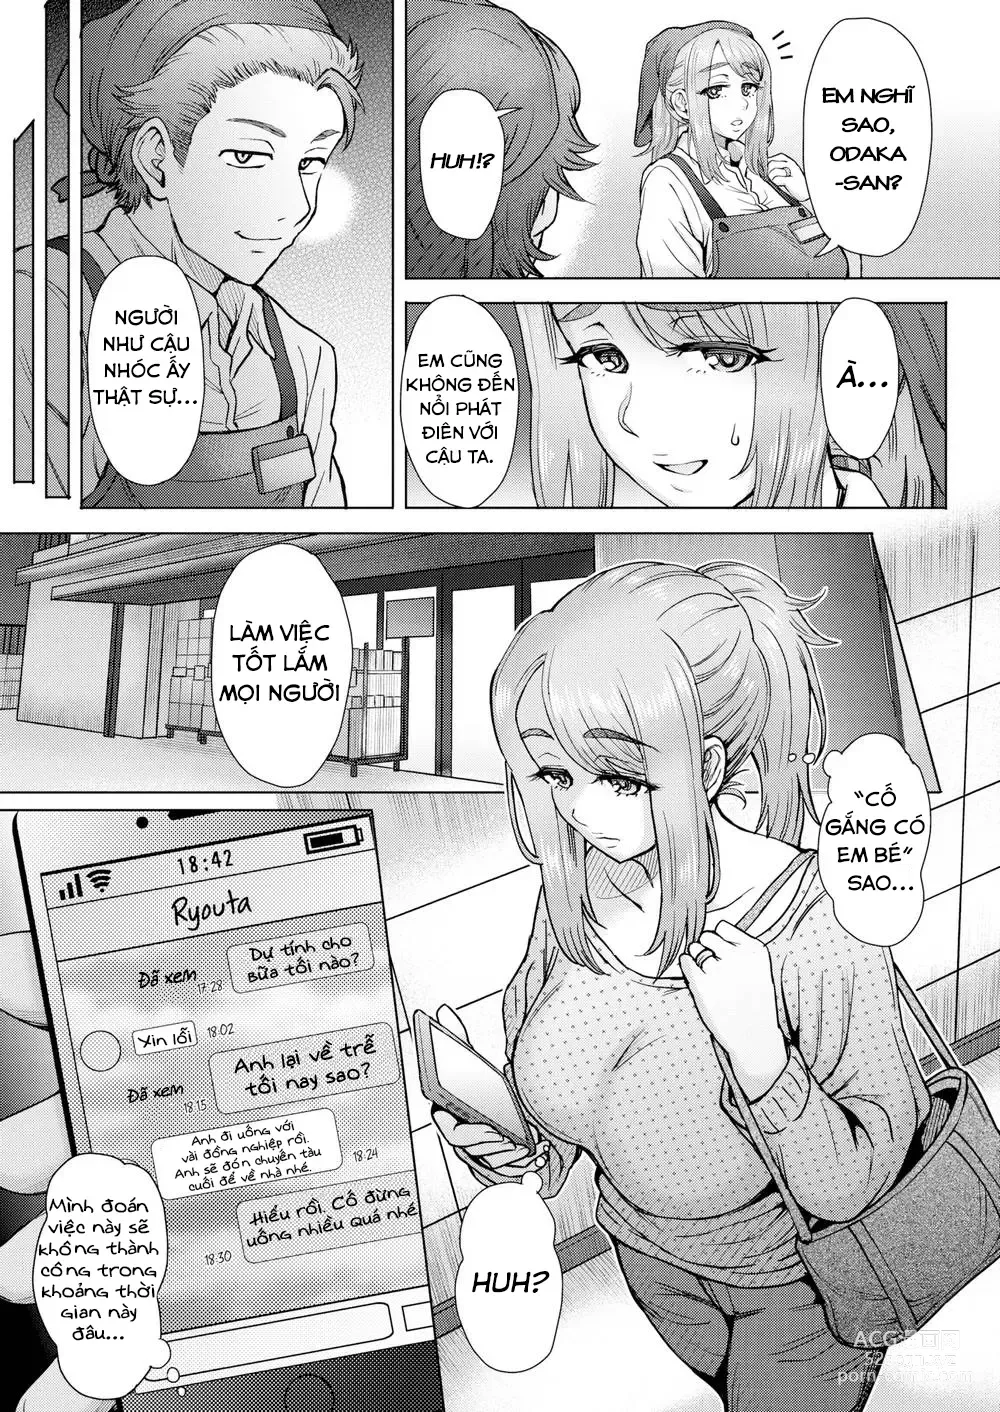 Page 3 of doujinshi Part-Time Infidelity